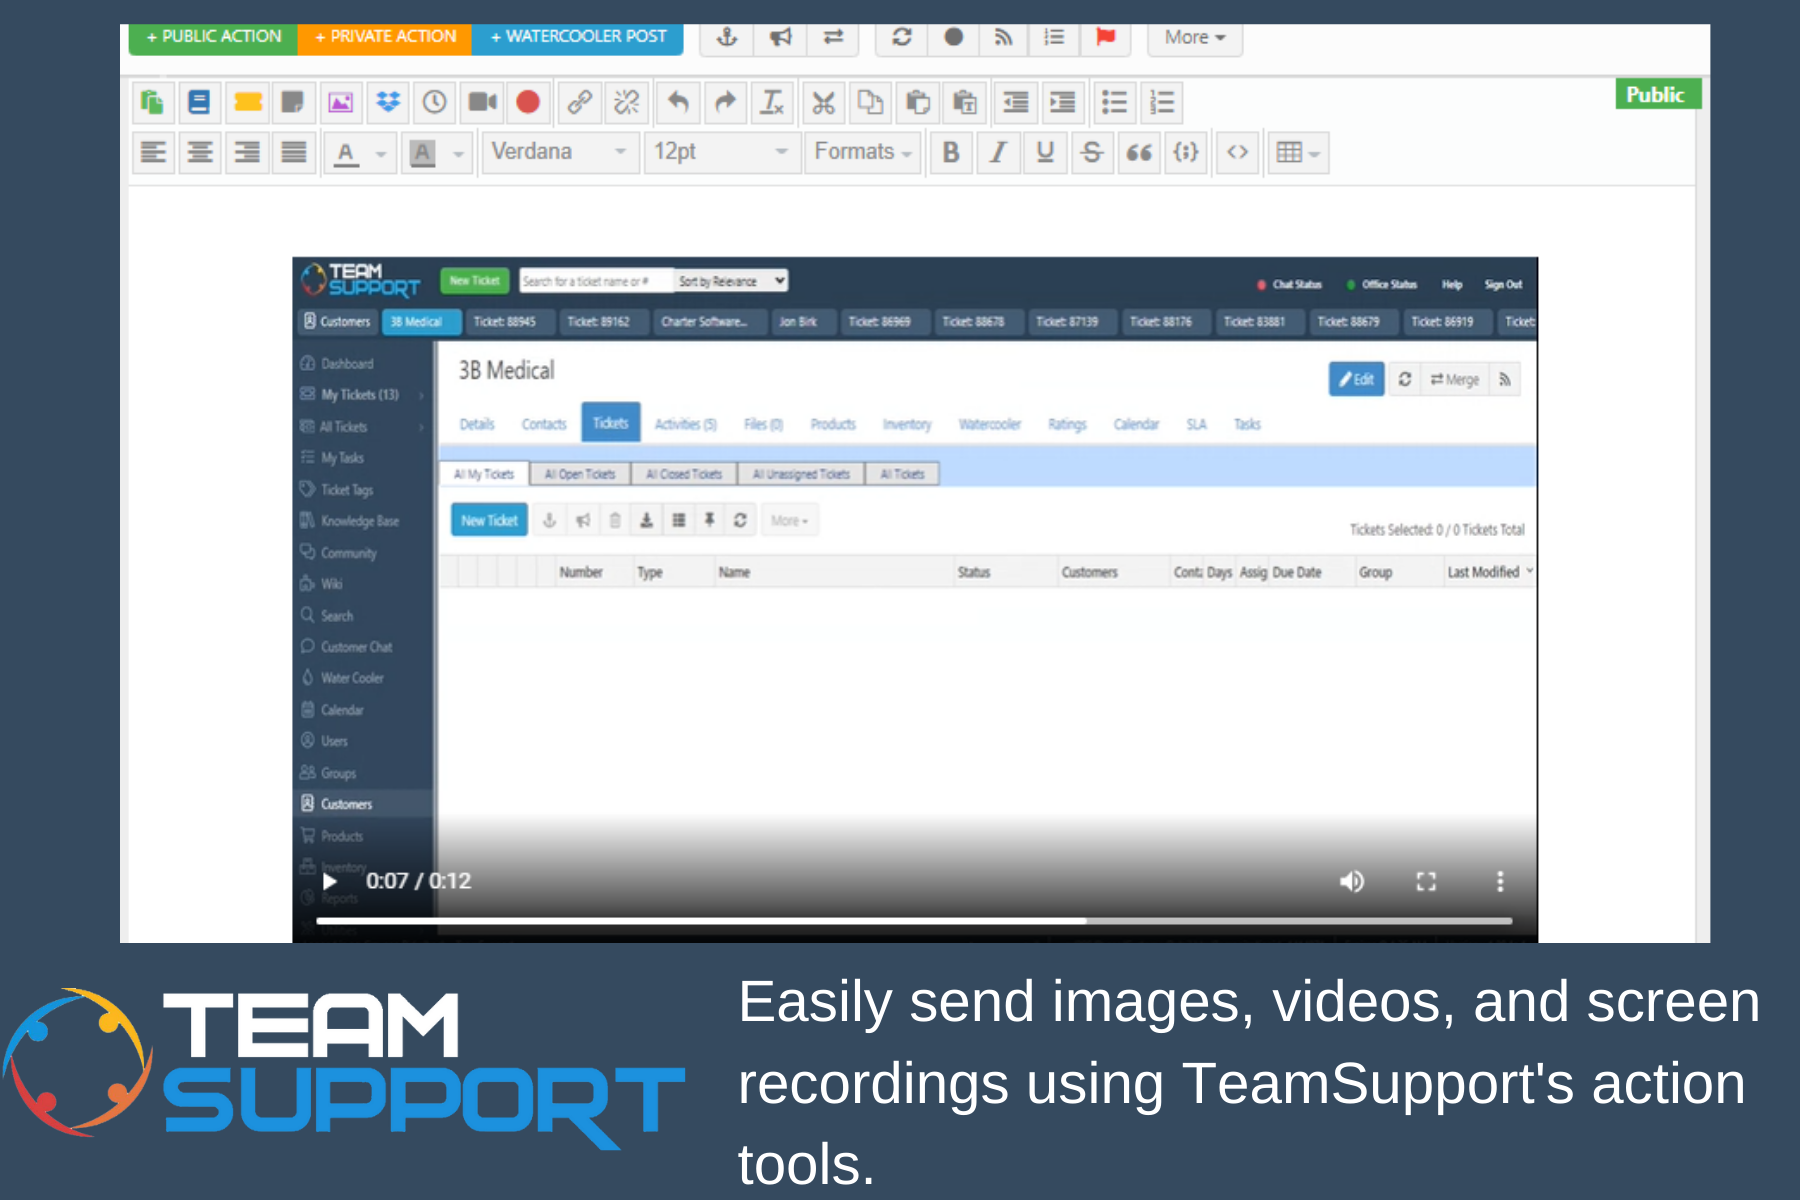 TeamSupport Software - Send video and screenshots in tickets!